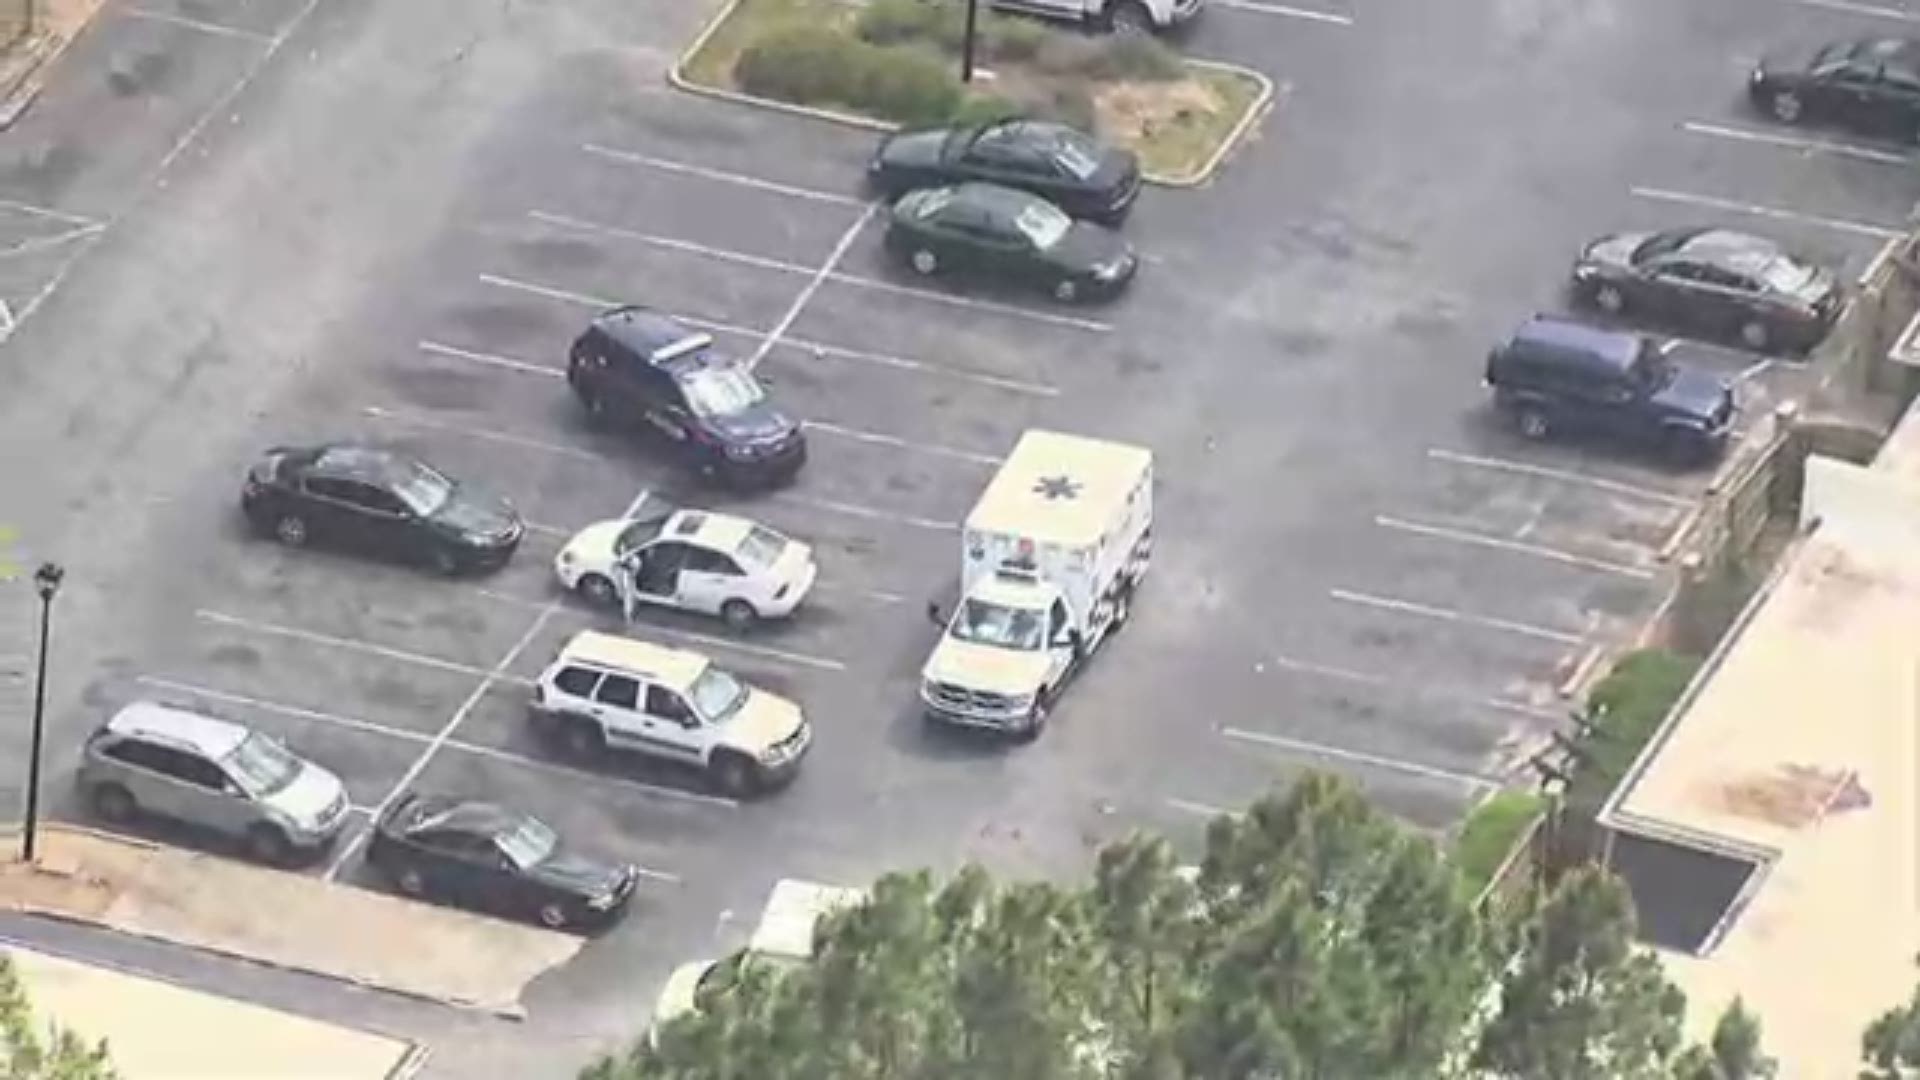 Here is 11Alive SkyTracker video from the scene.